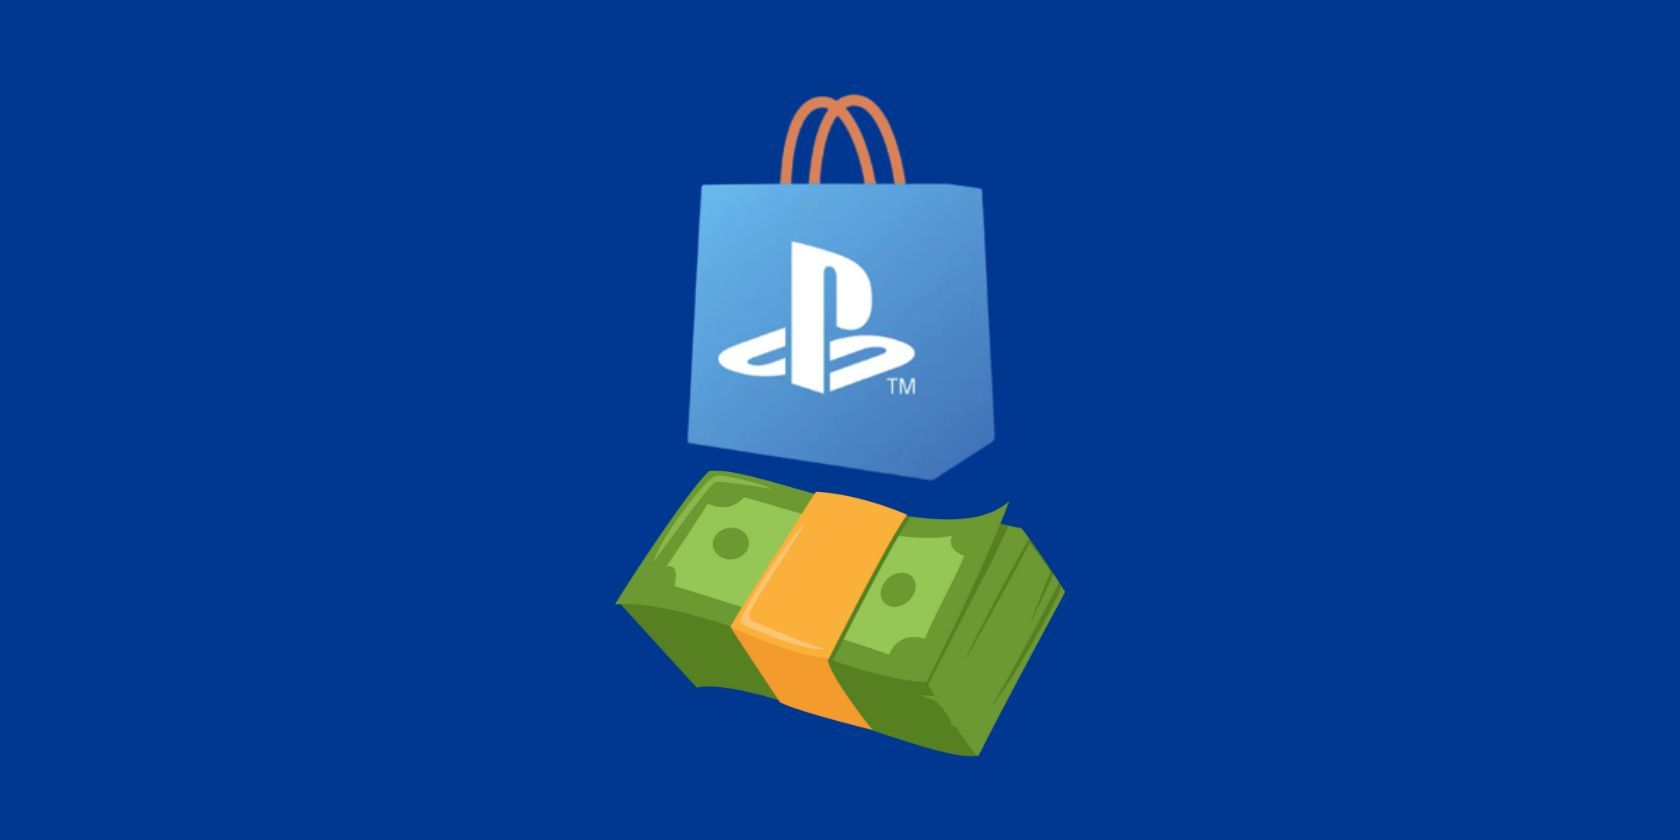 PS4 Store - Search Shopping